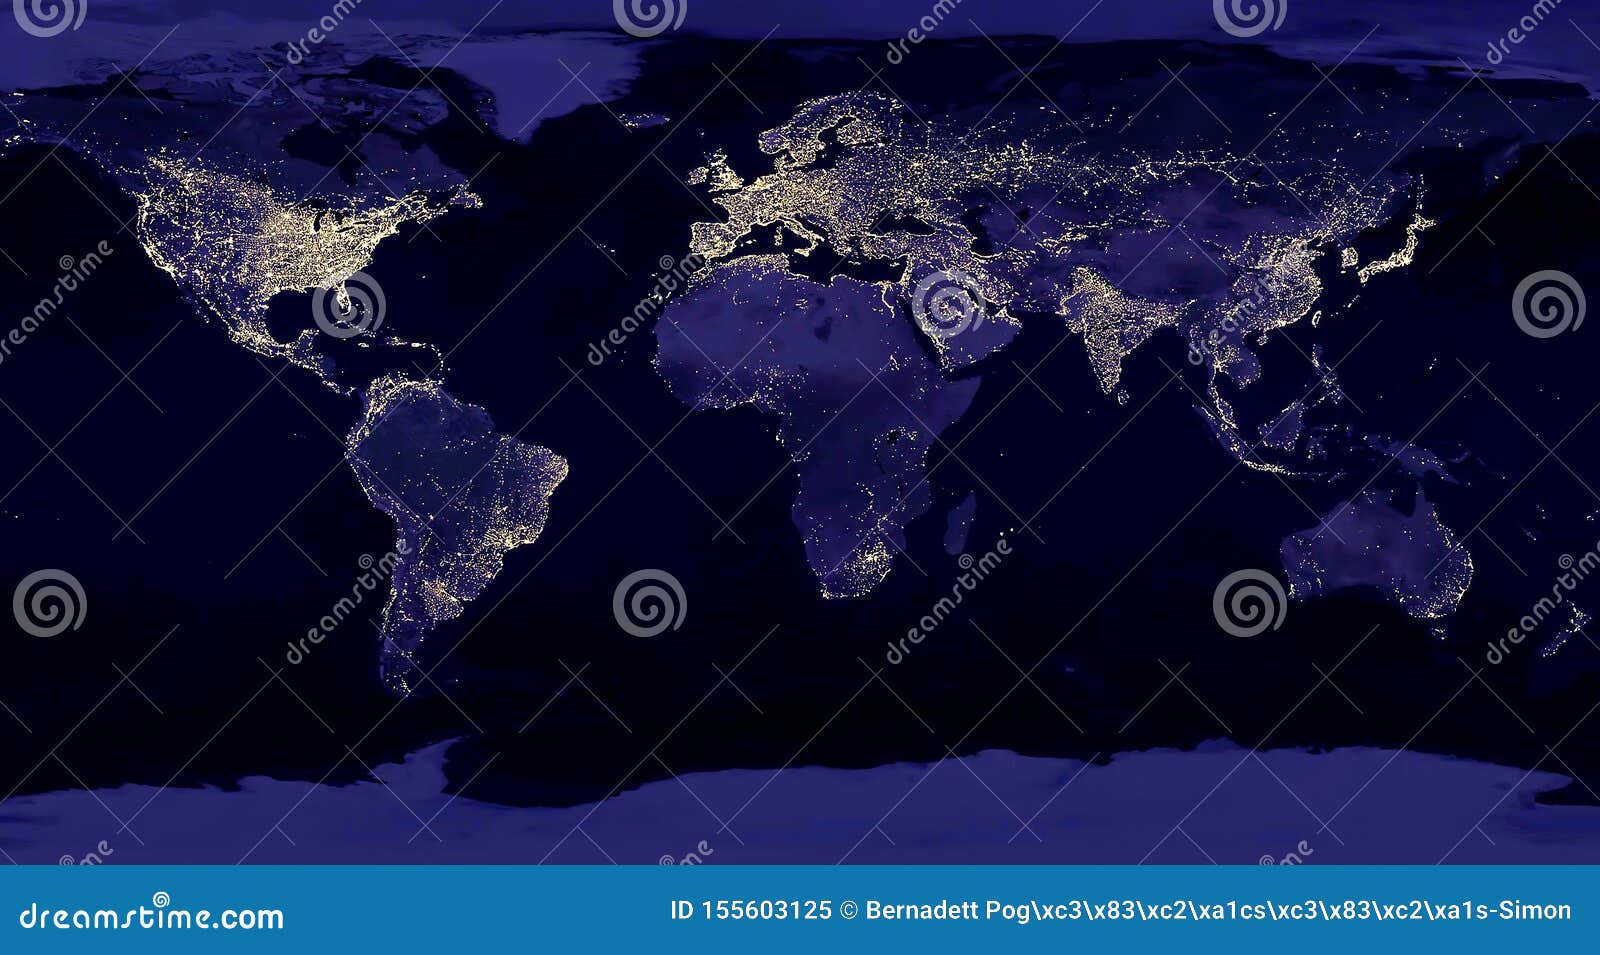 earth night view from space map with city lights satellite-based observations. `s of this image furnished by nasa